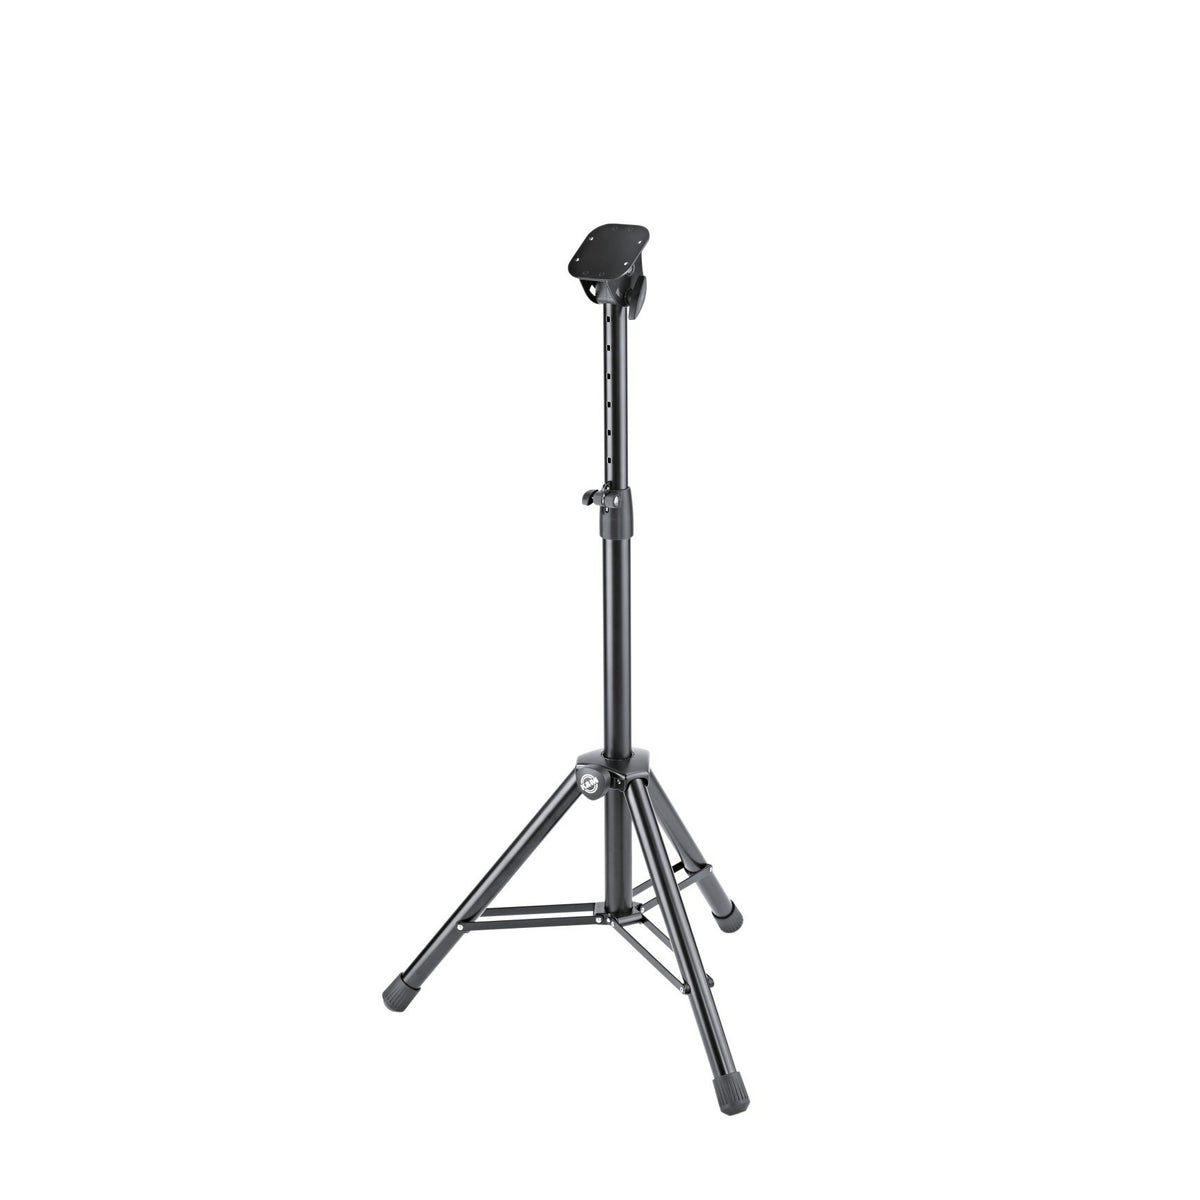 KÃ¶nig &amp; Meyer - 12331 Orchestra Conductor Stand Base-Music Stand-KÃ¶nig &amp; Meyer-Music Elements